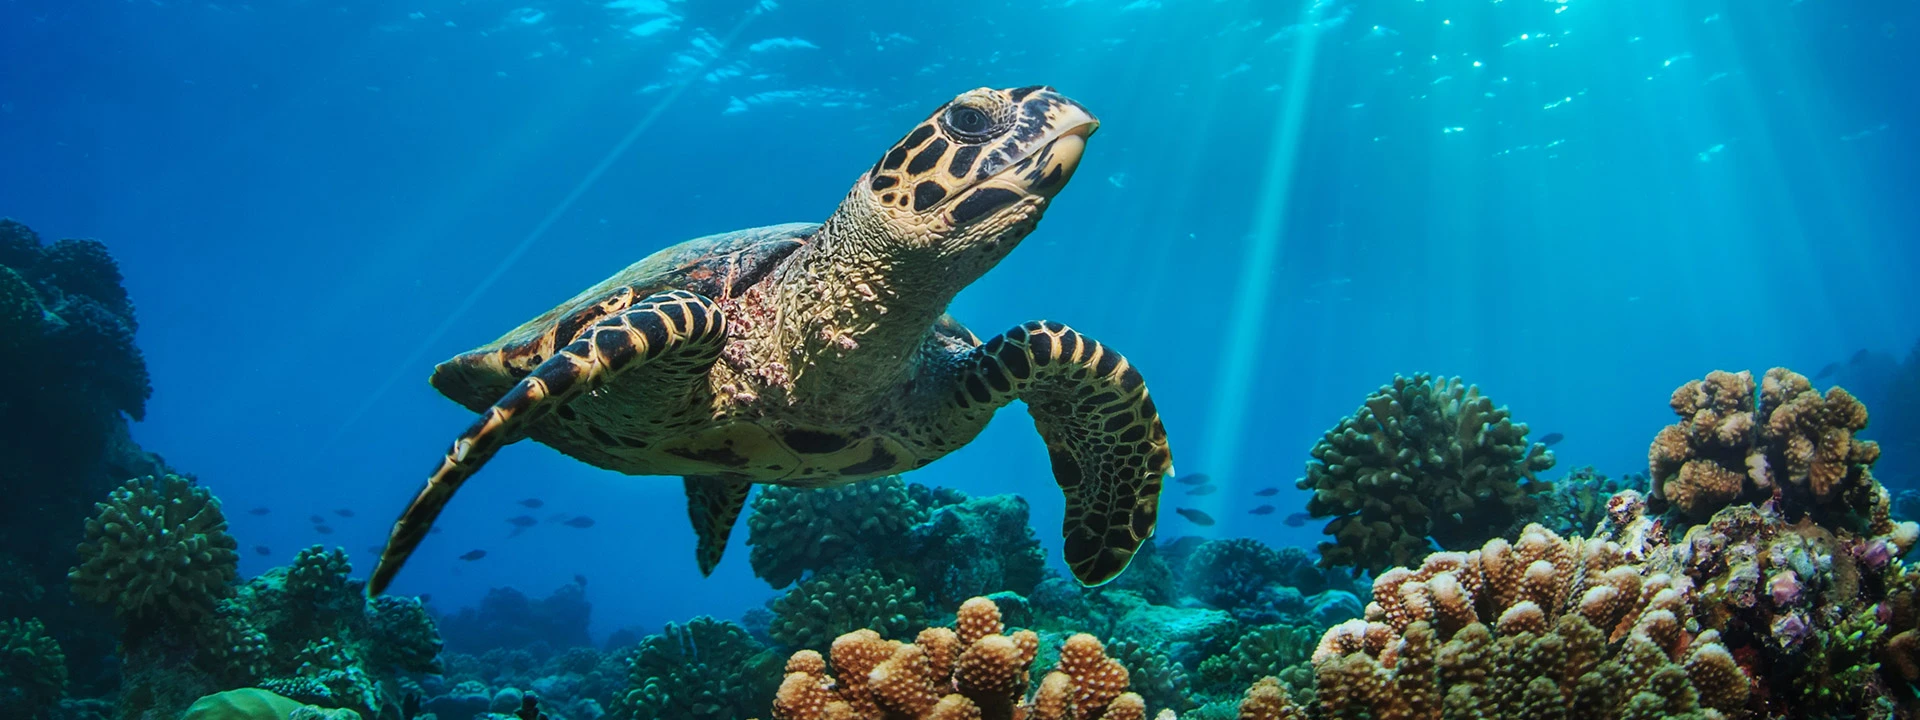 swimming and scuba diving with sea turtles in the Caribbean Sea